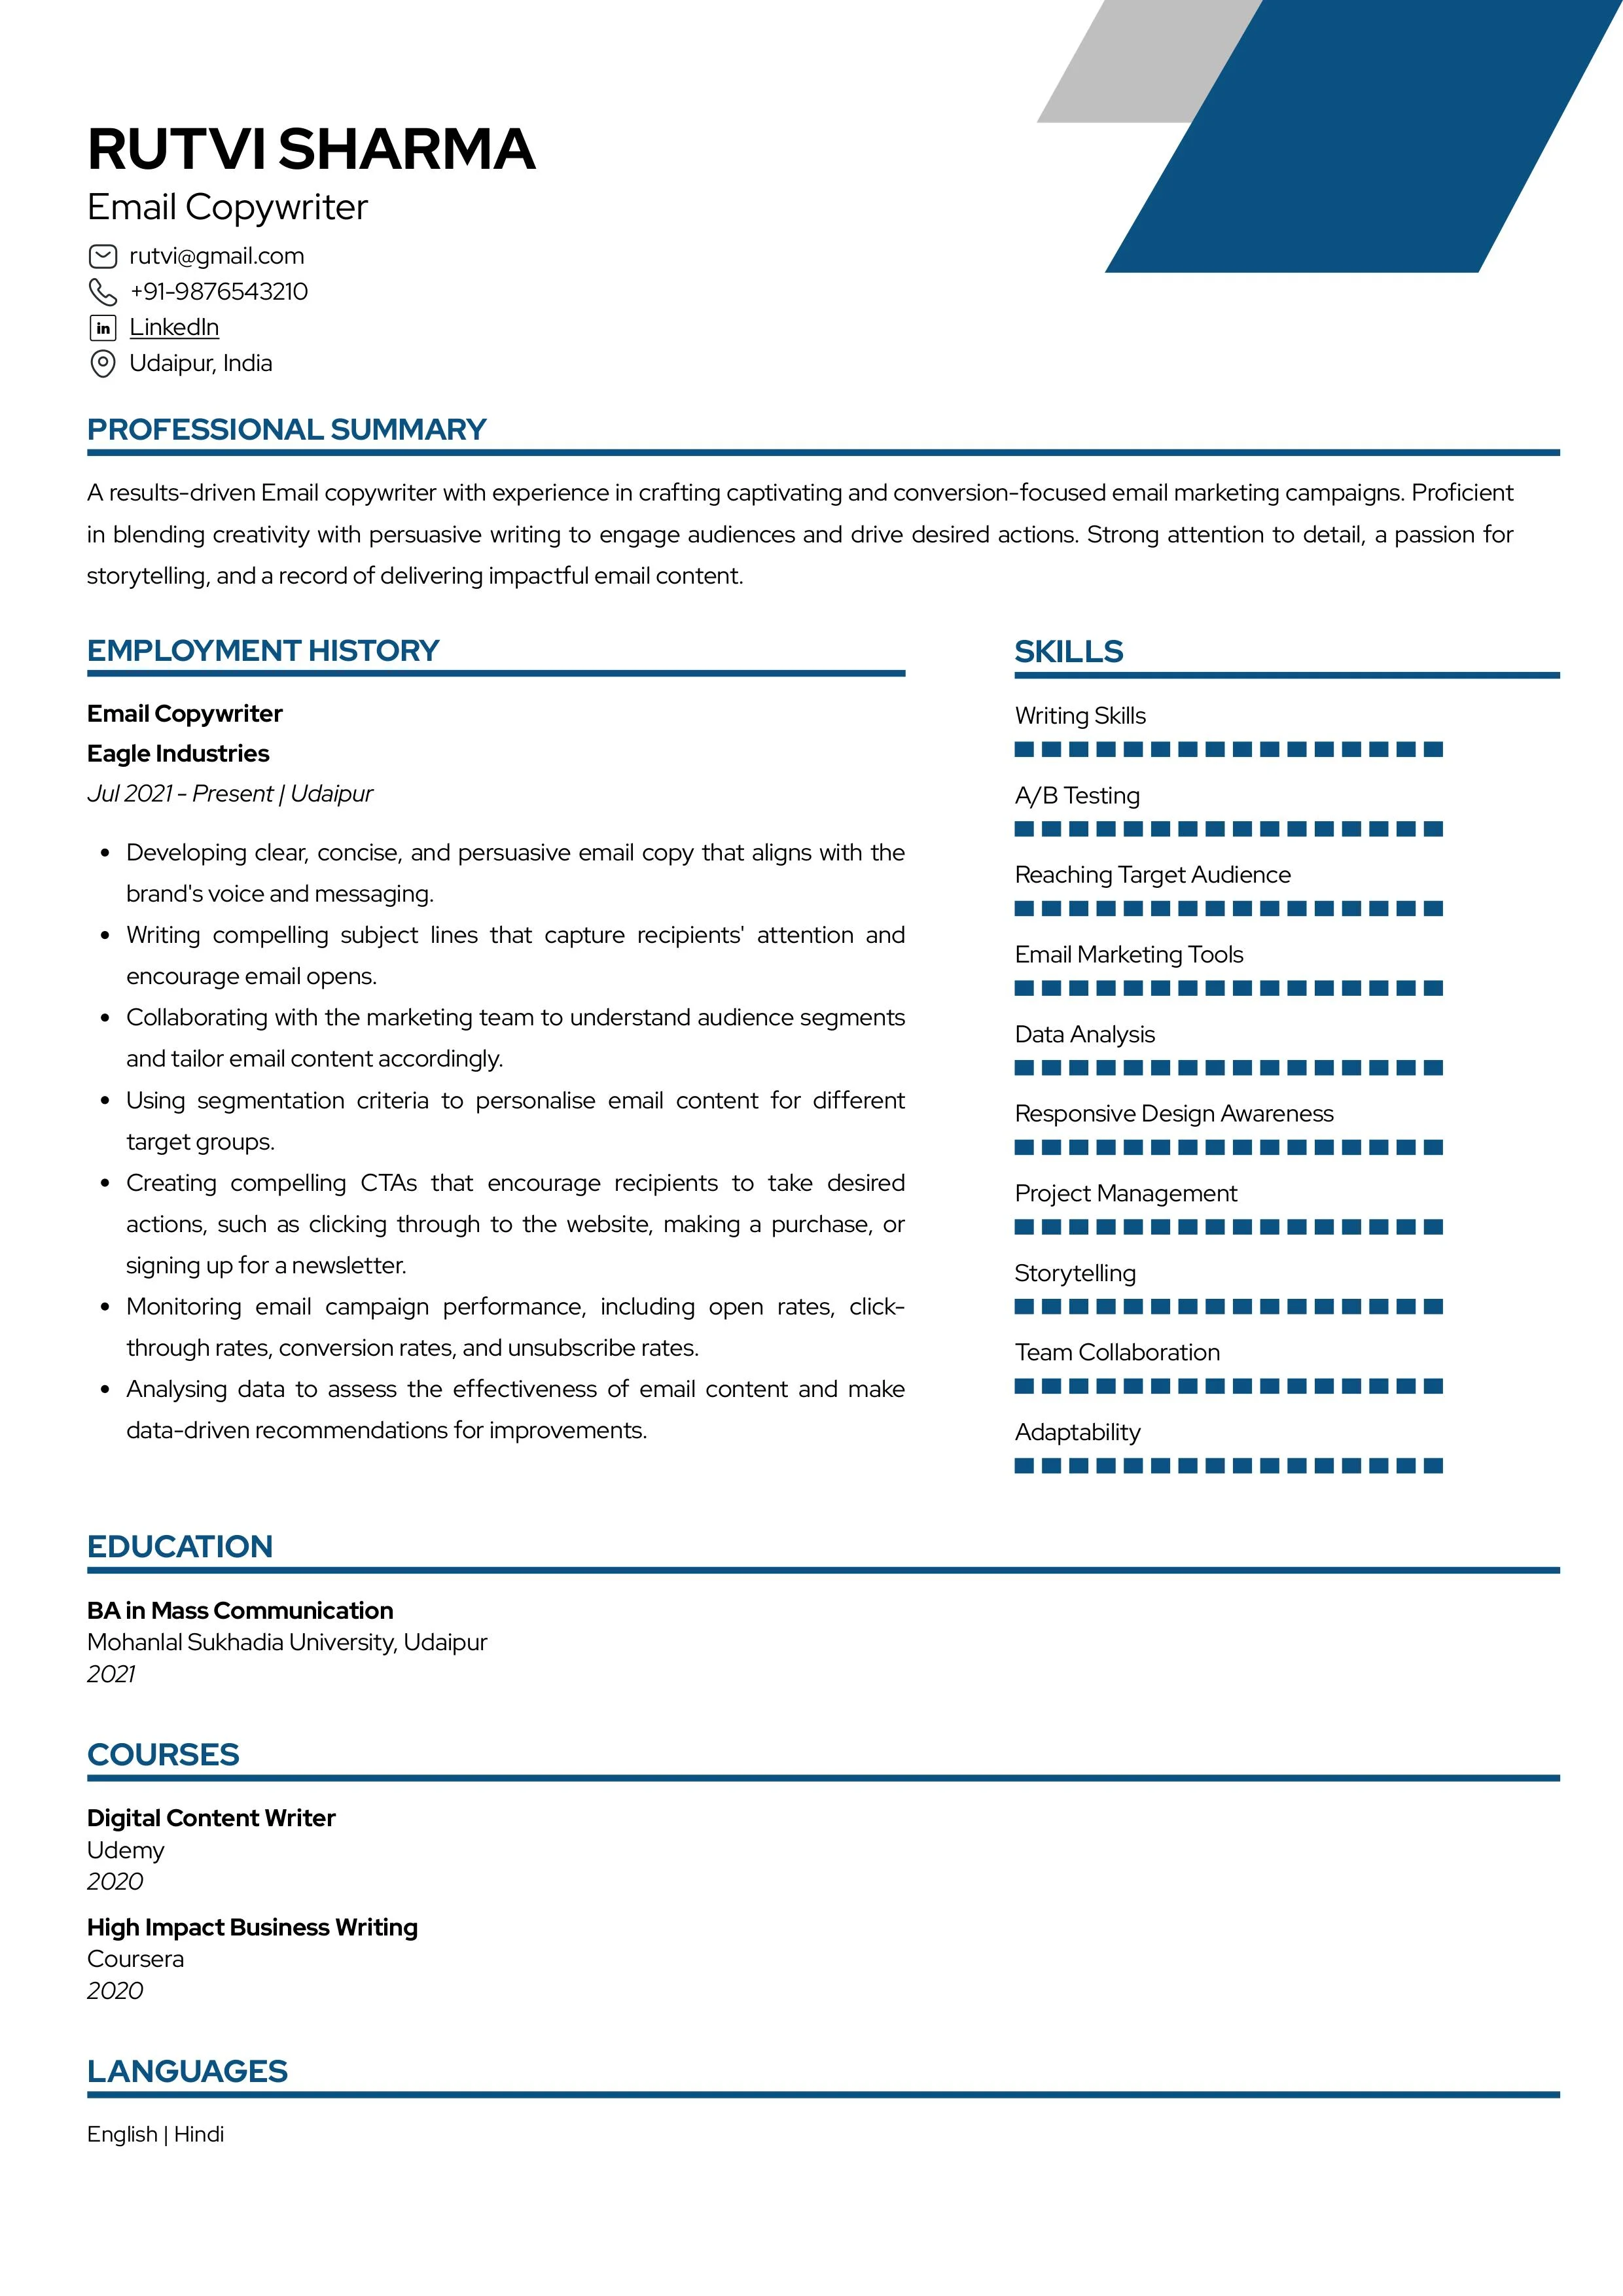 Sample Resume of Email Copywriter | Free Resume Templates & Samples on Resumod.co